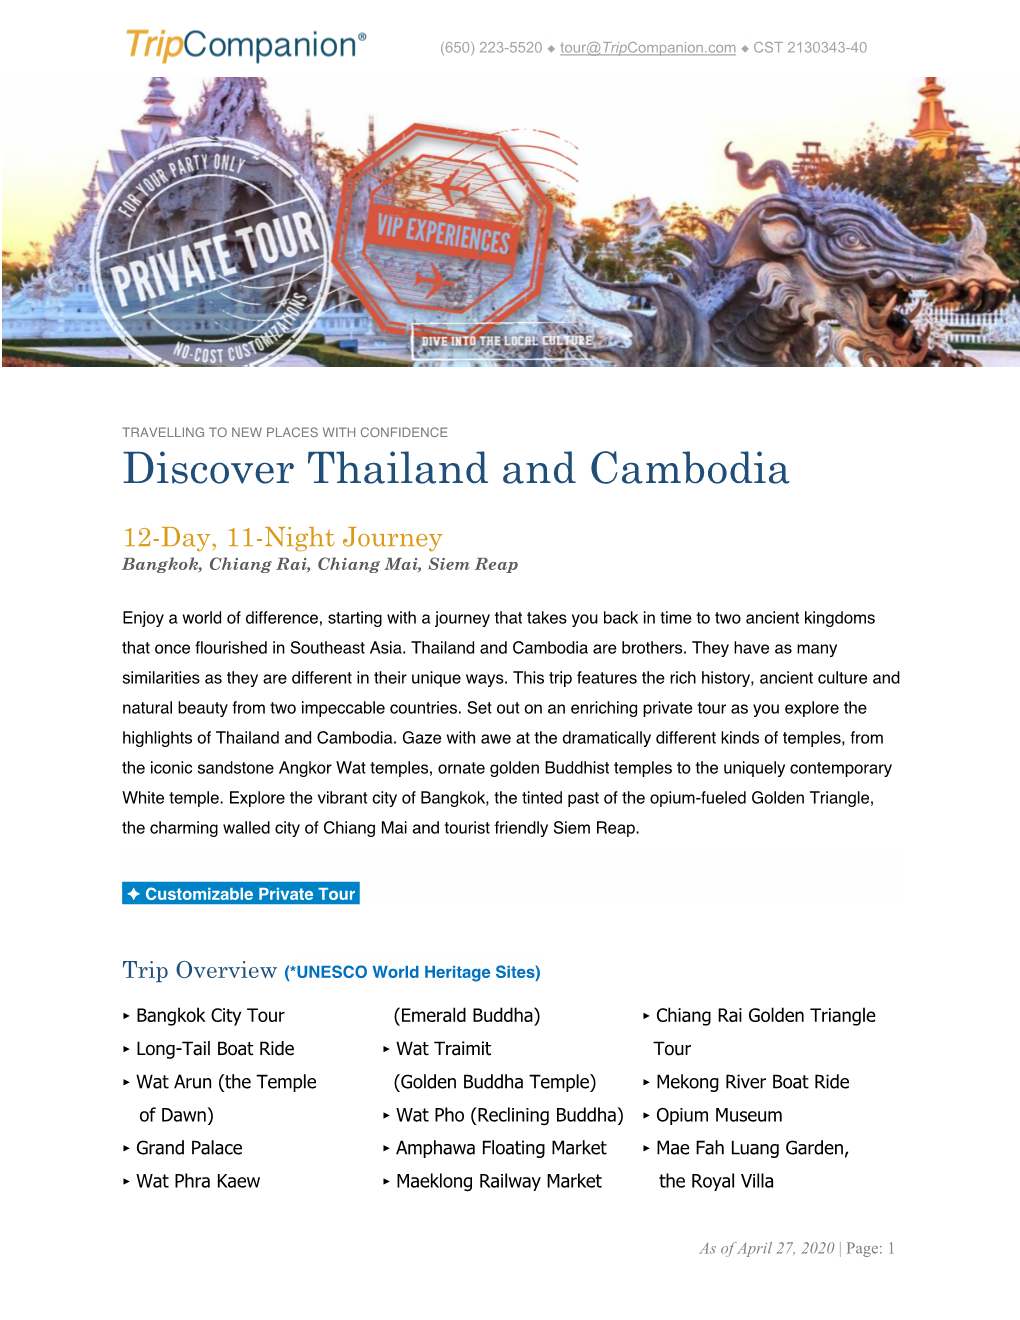 Discover Thailand and Cambodia